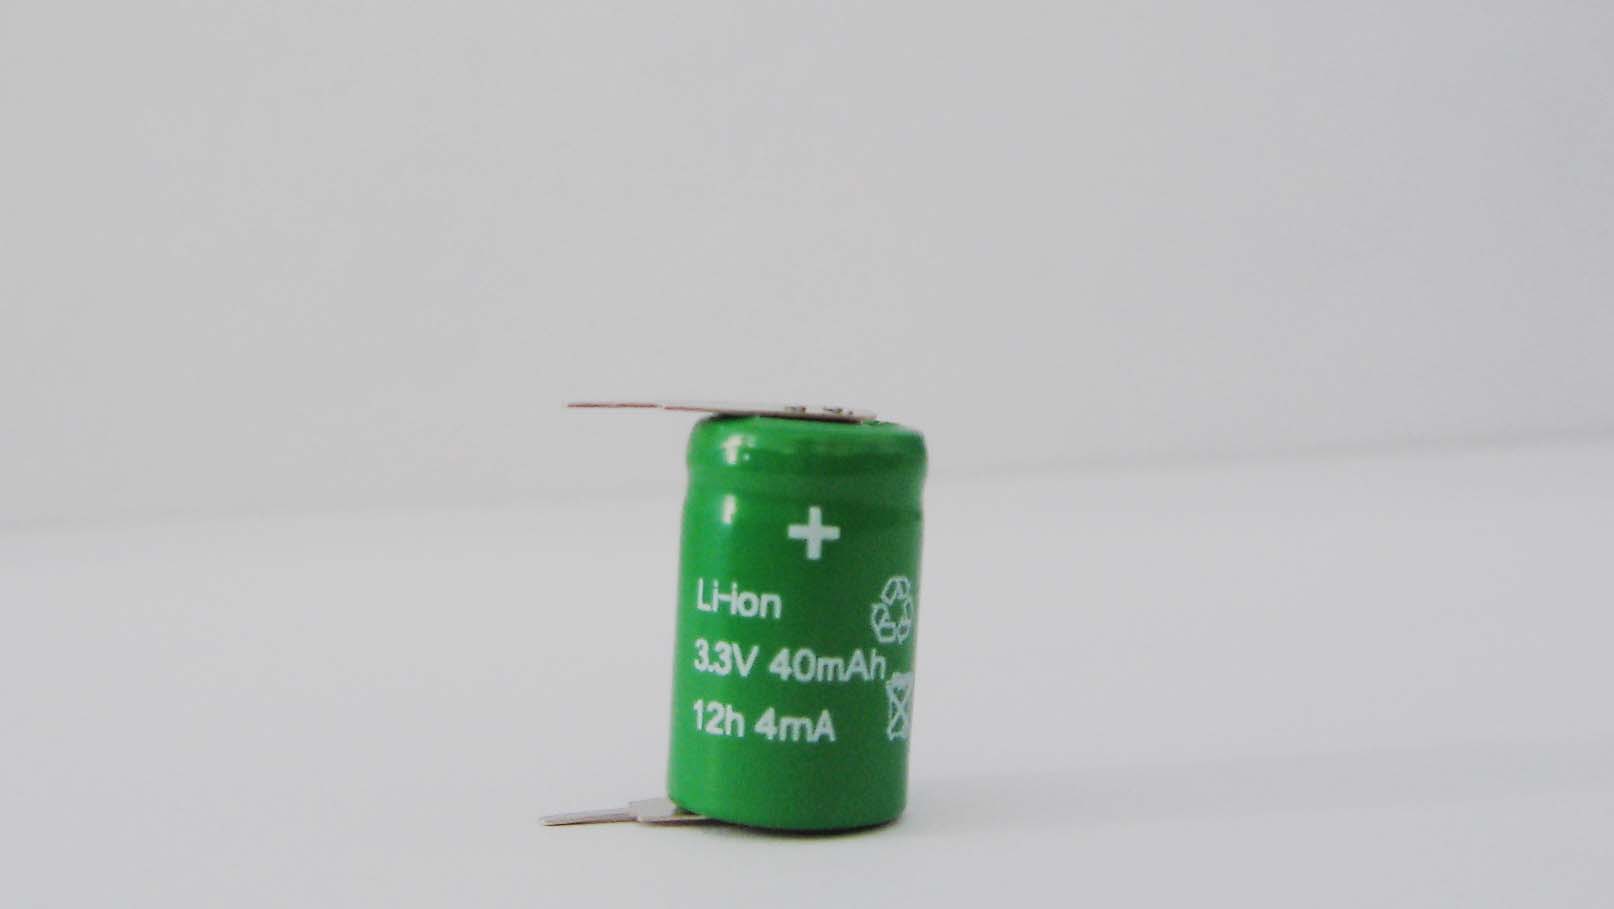 Security Li-ion Rechargeable Battery 3.3V 60mAh